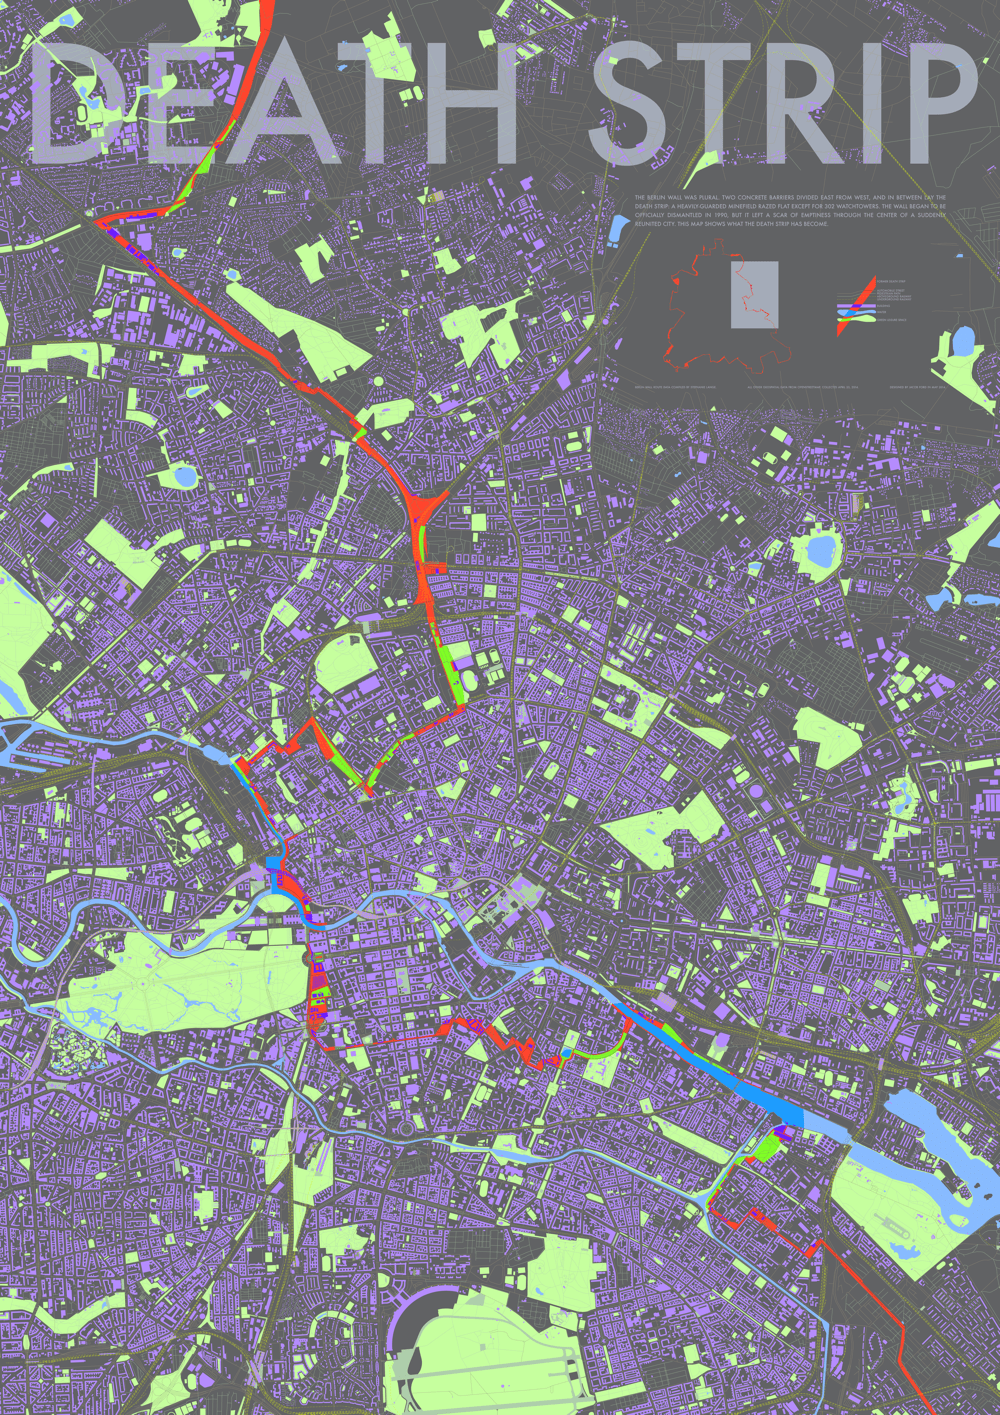 A map depicting the Death Strip slicing through Berlin.